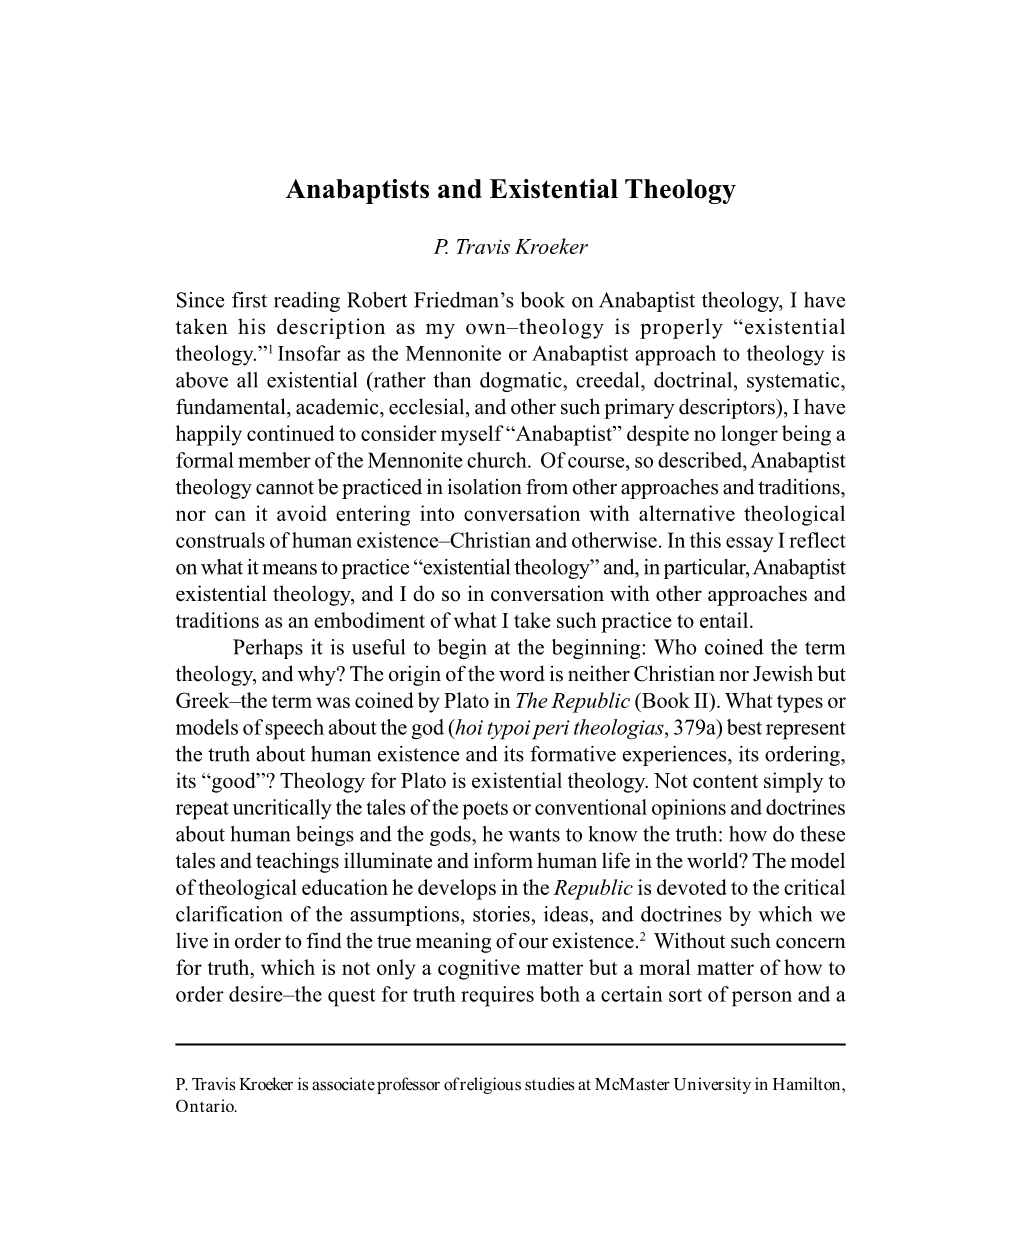 Anabaptists and Existential Theology (The Conrad Grebel Review, Spring 1999)